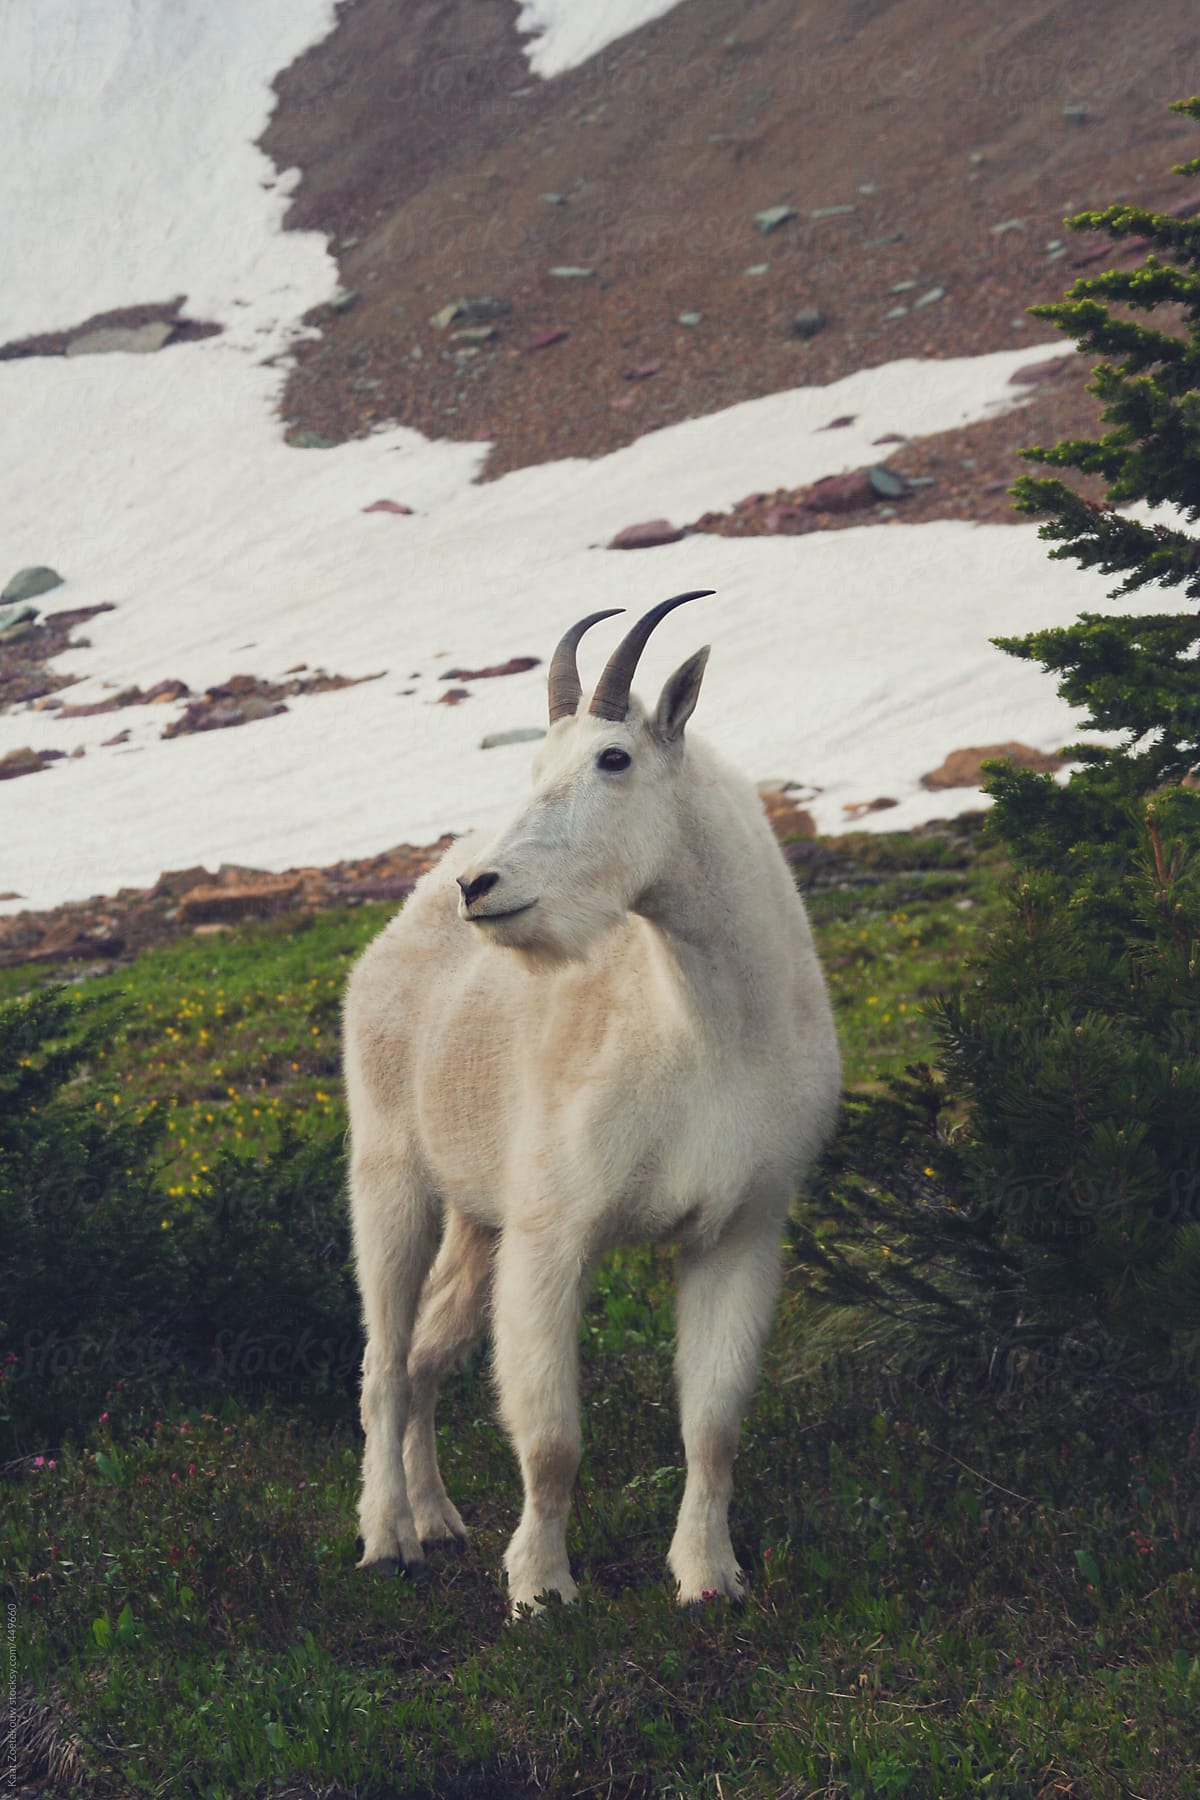 A lone mountain goat in its natural habitat, Glacier National Park\'s snowy mountain region.